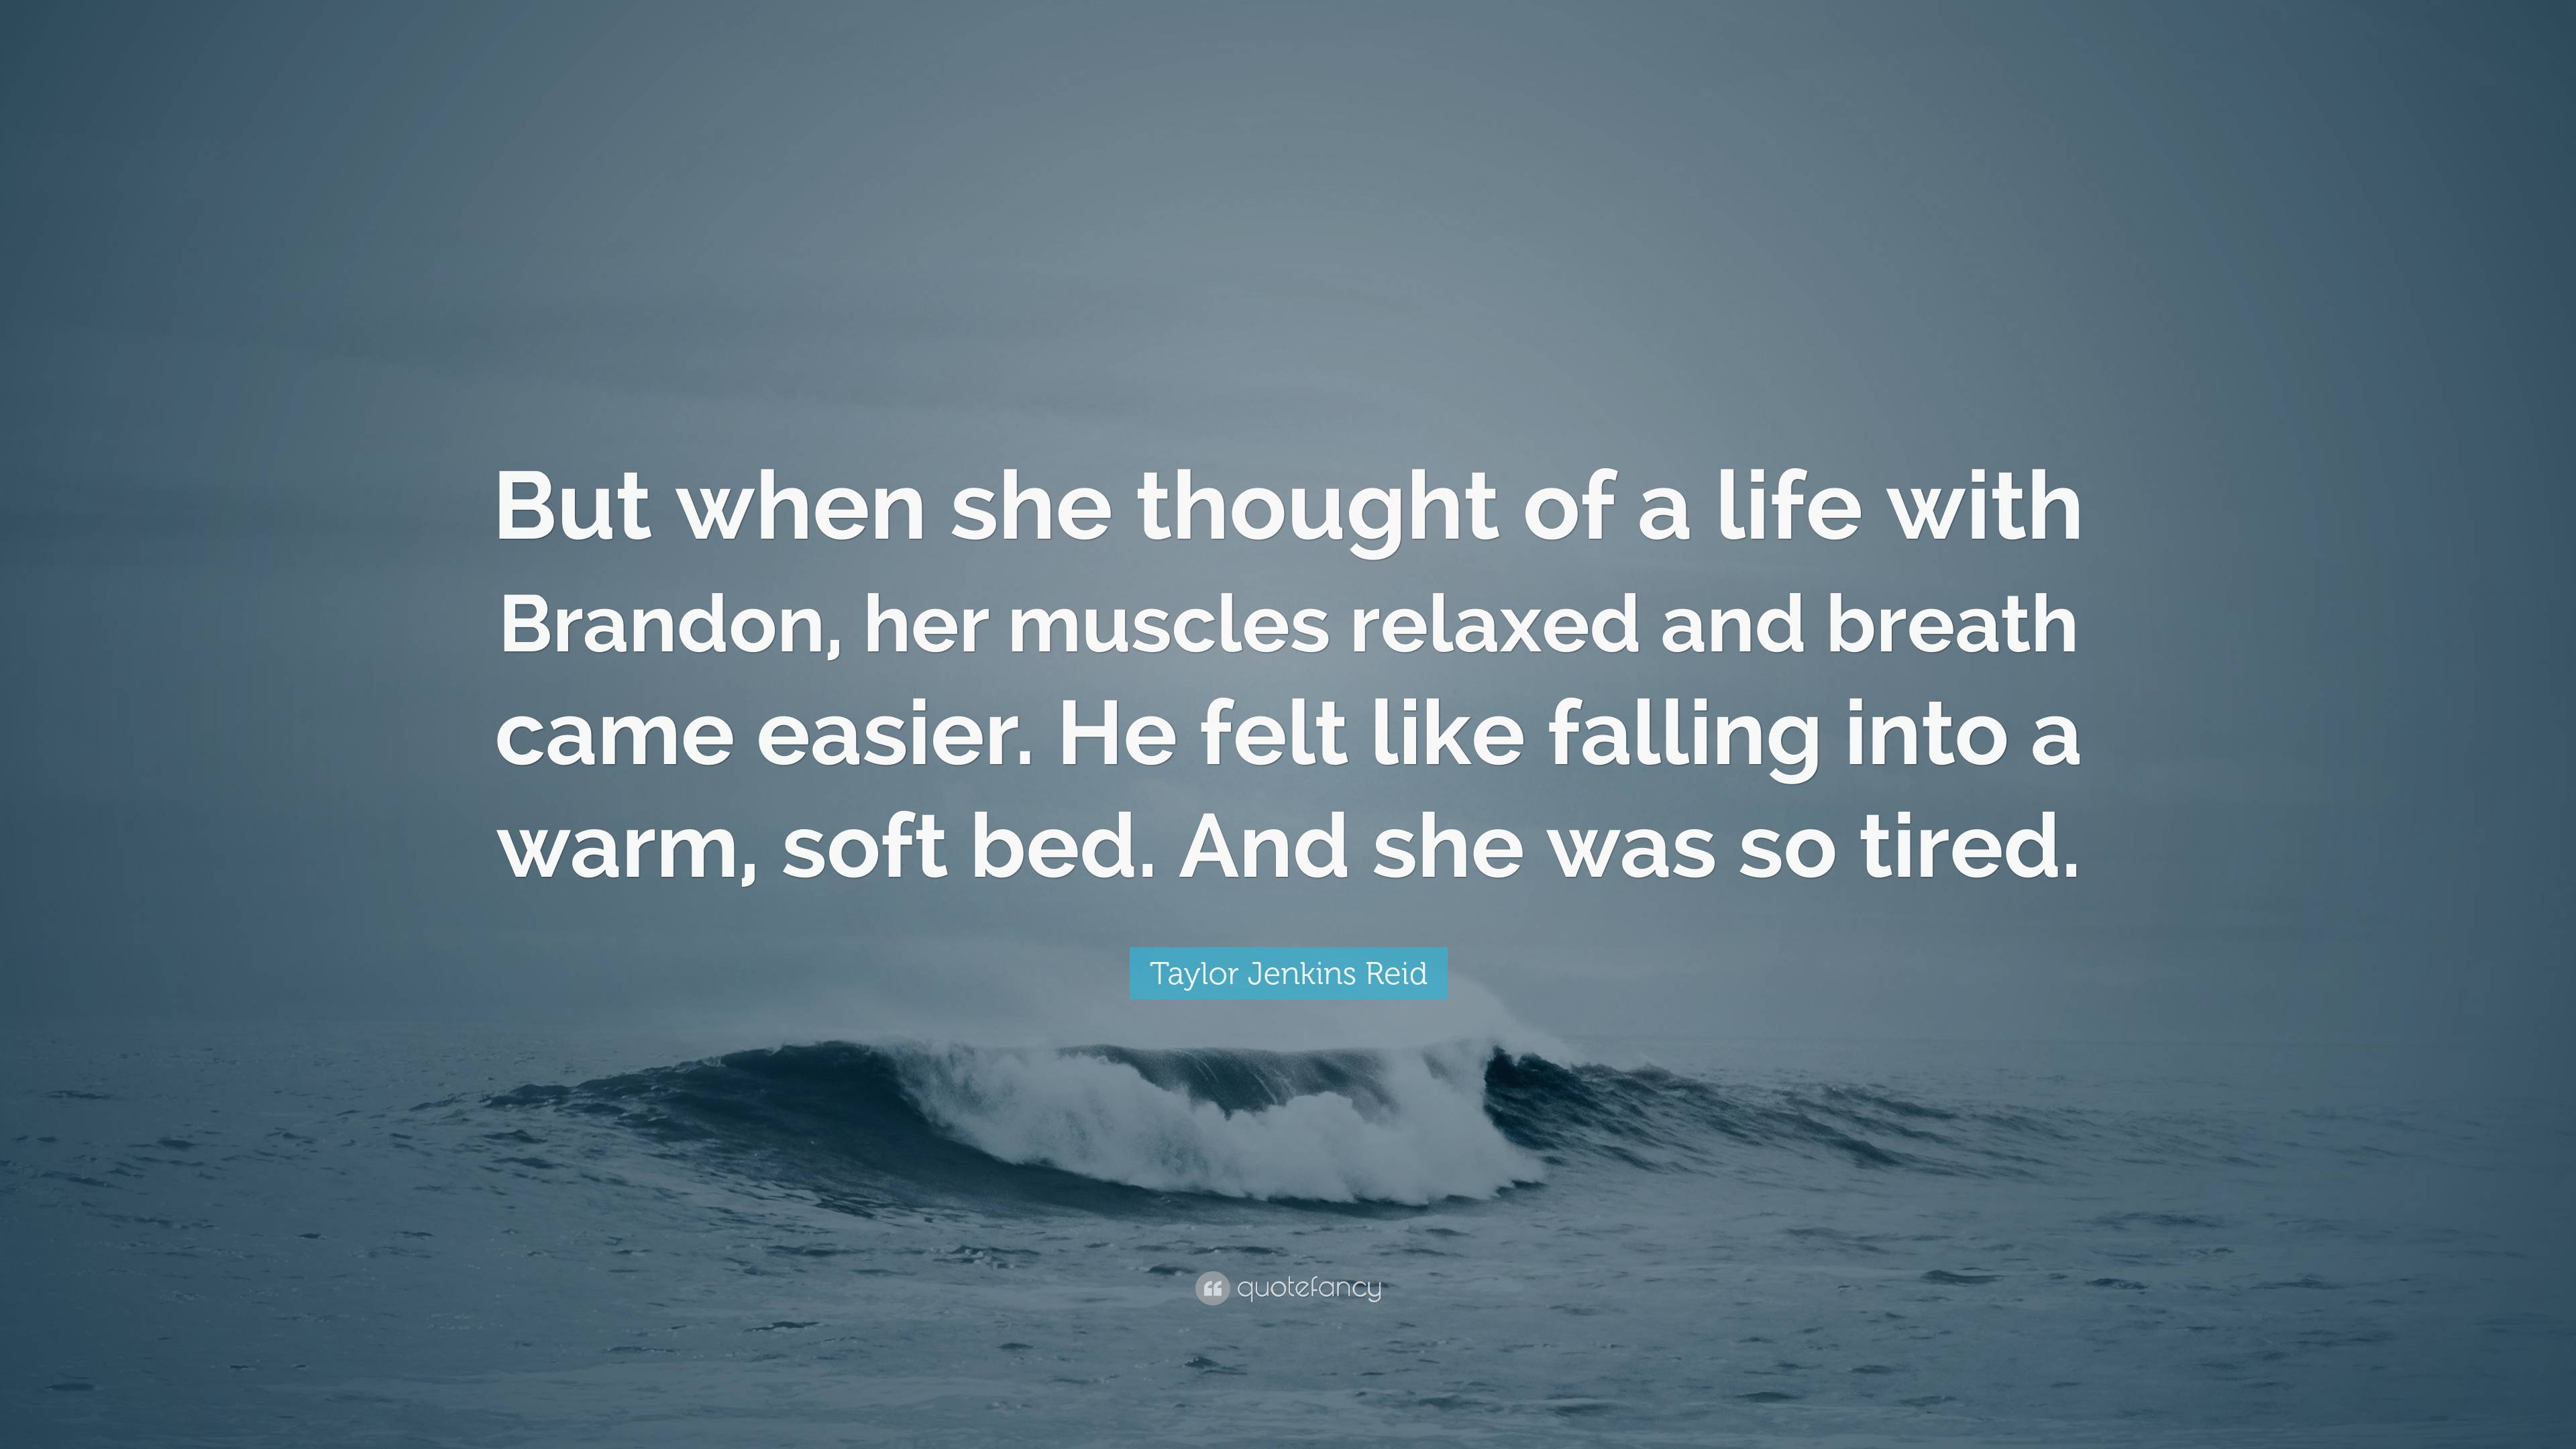 Taylor Jenkins Reid Quote: “But when she thought of a life with Brandon ...